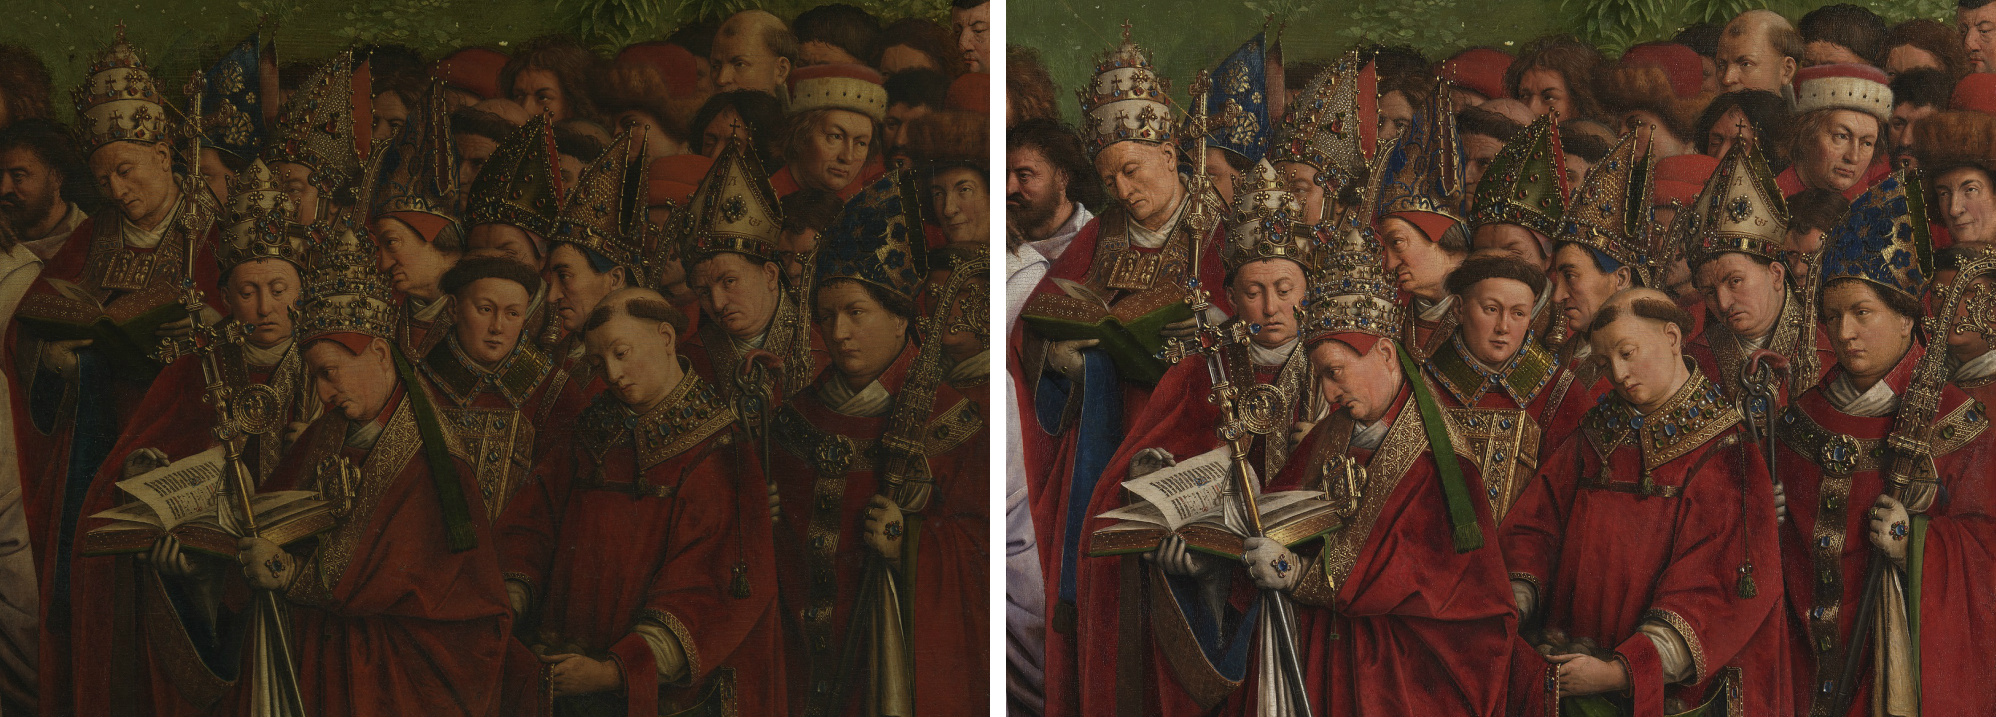 Before and after details of Ghent Altarpiece